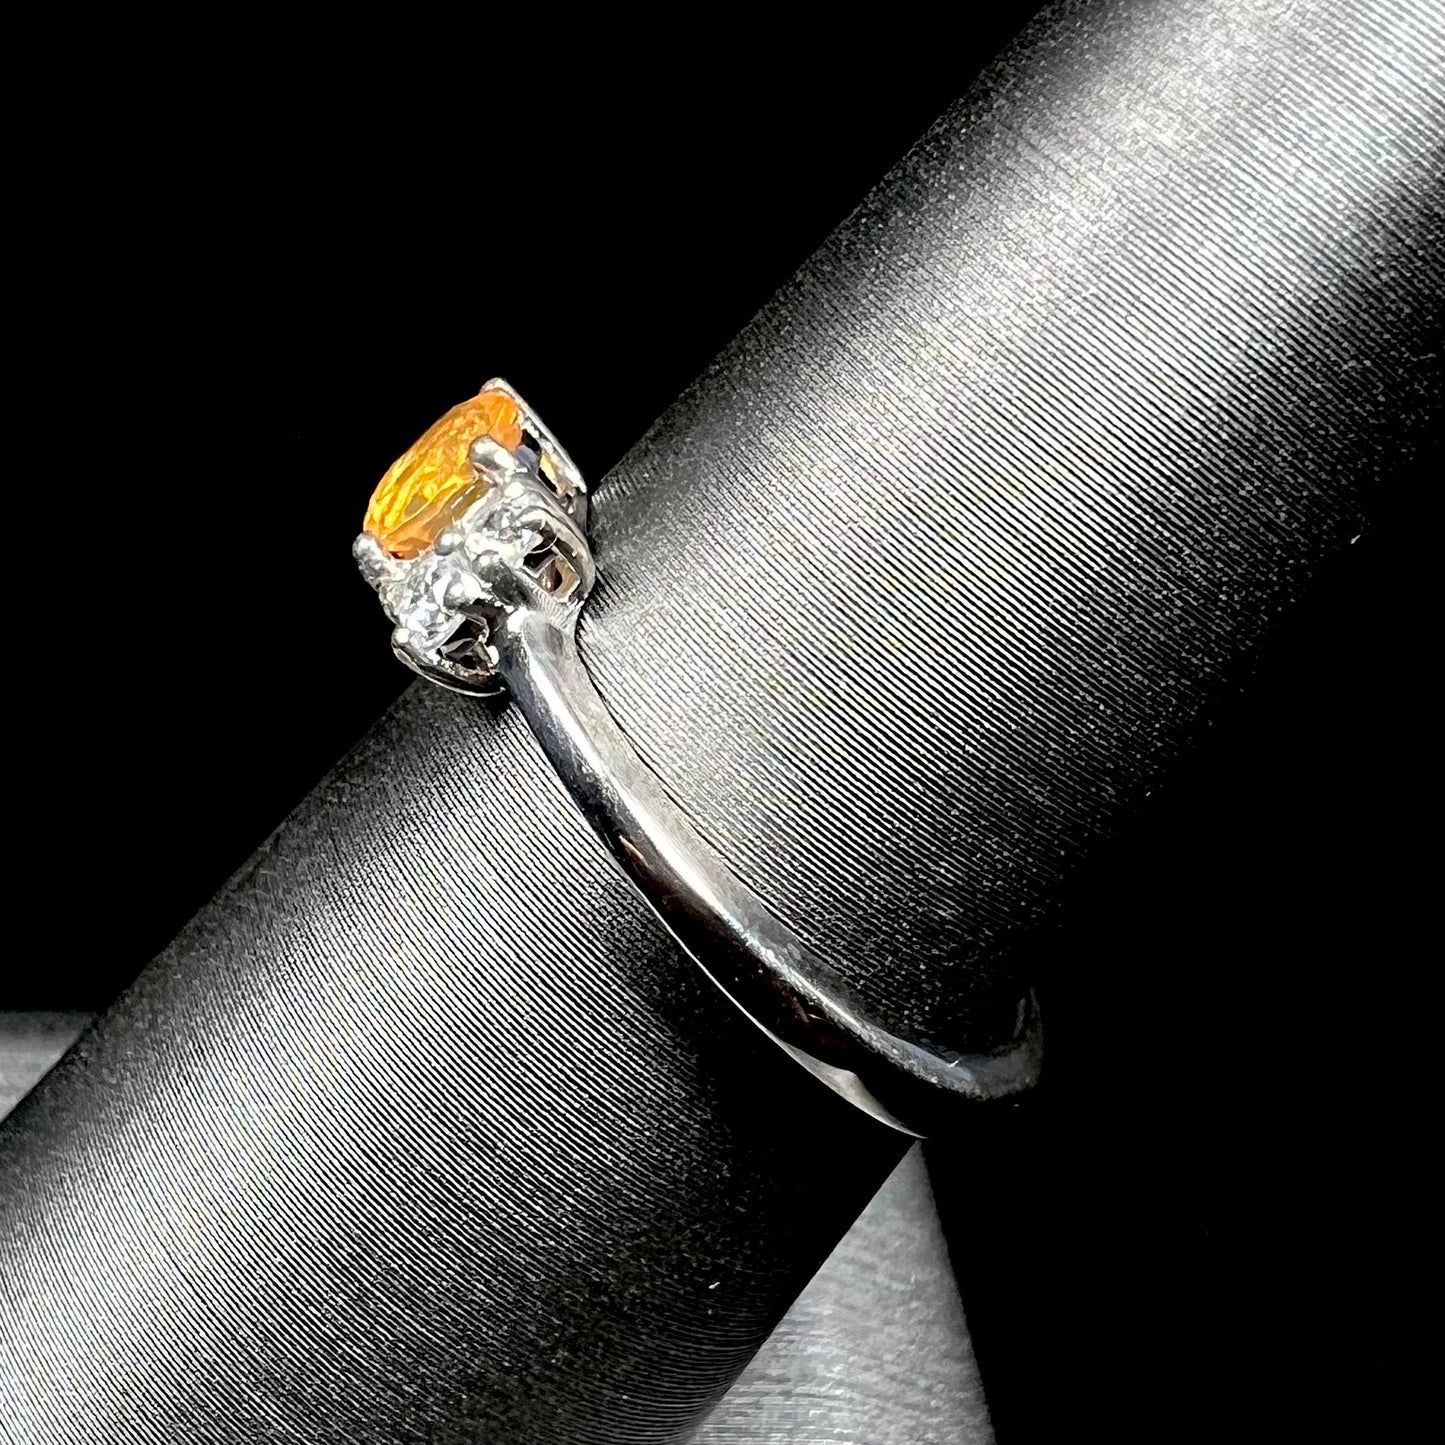 A ladies' sterling silver ring set with a faceted round cut fire opal and white zircon accents.